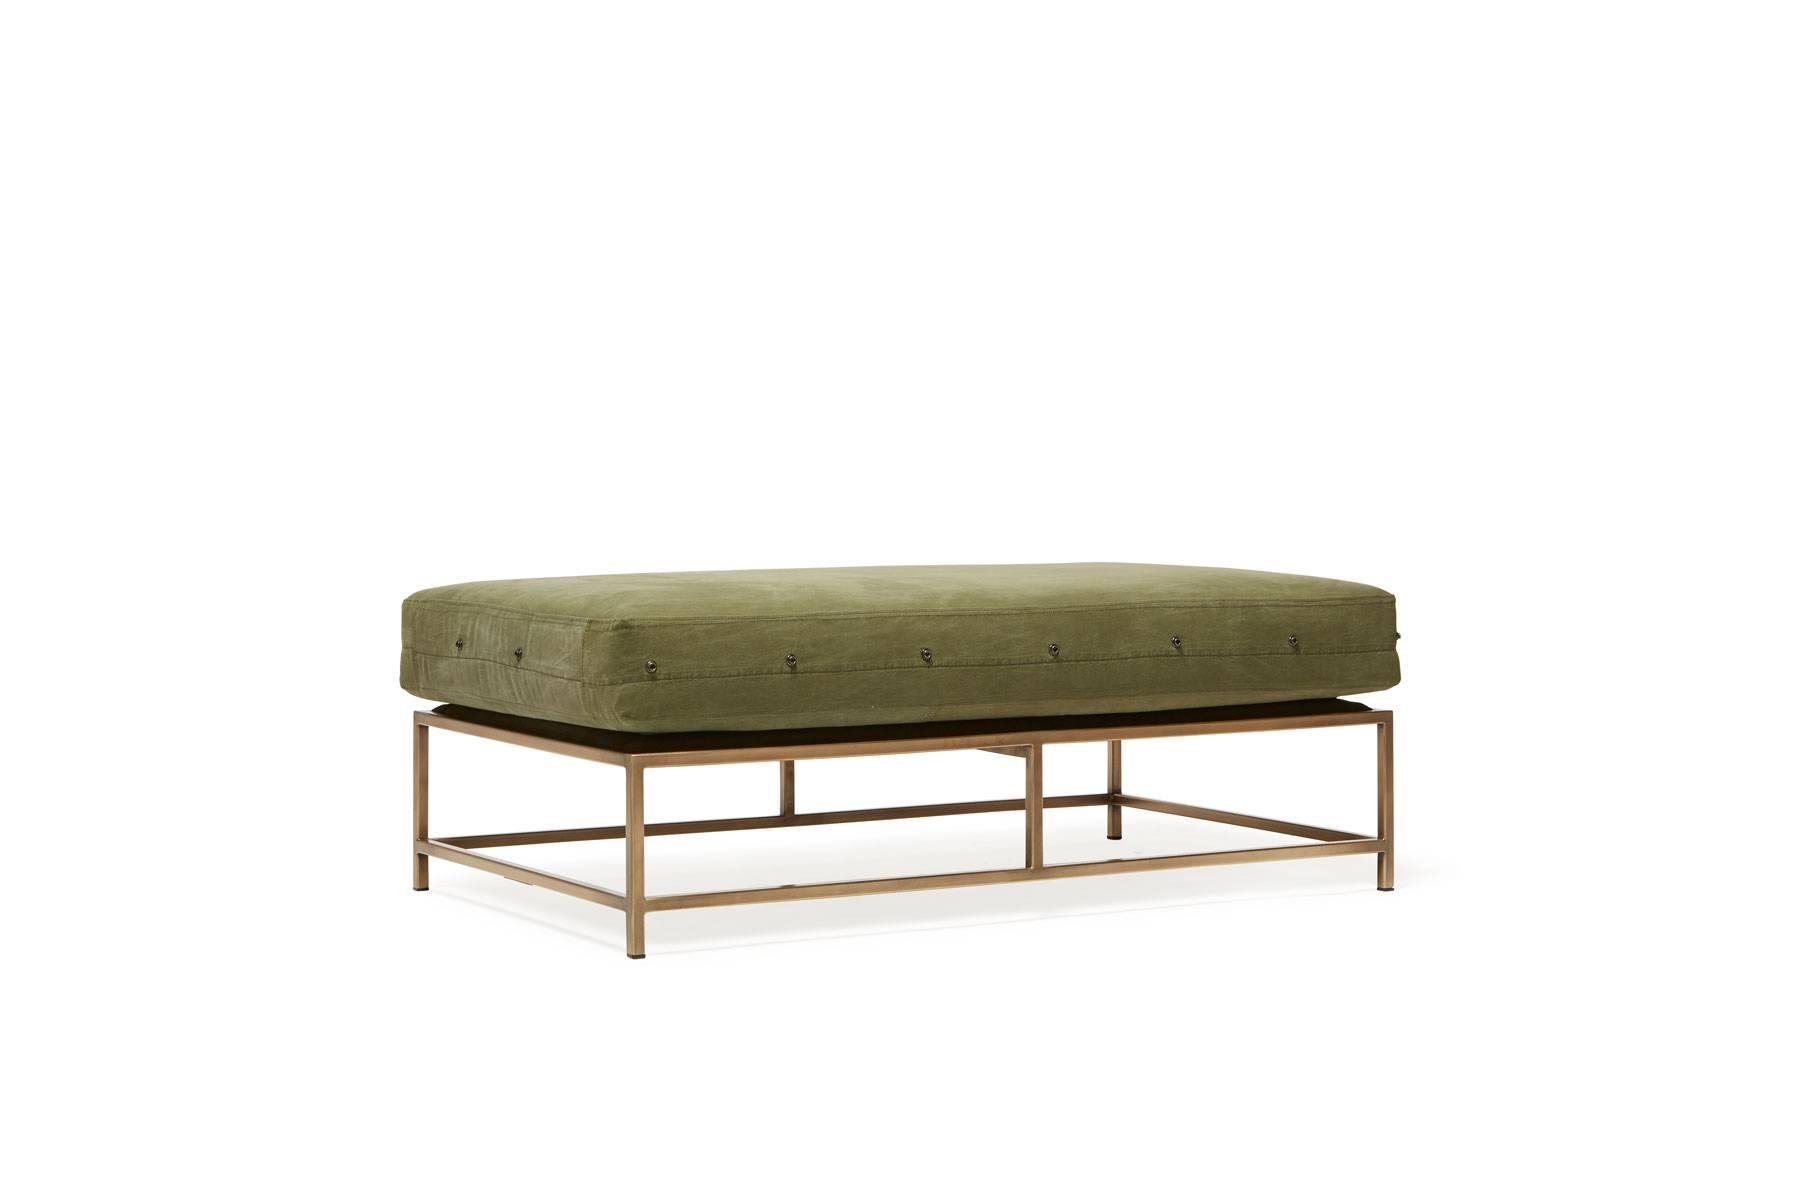 The Inheritance Bench is a versatile piece that can be used as a chaise extension on any sofa, as an independent seating option or as a large upholstered coffee table.  

Since first designing Inheritance Collection, Stephen Kenn has been inspired